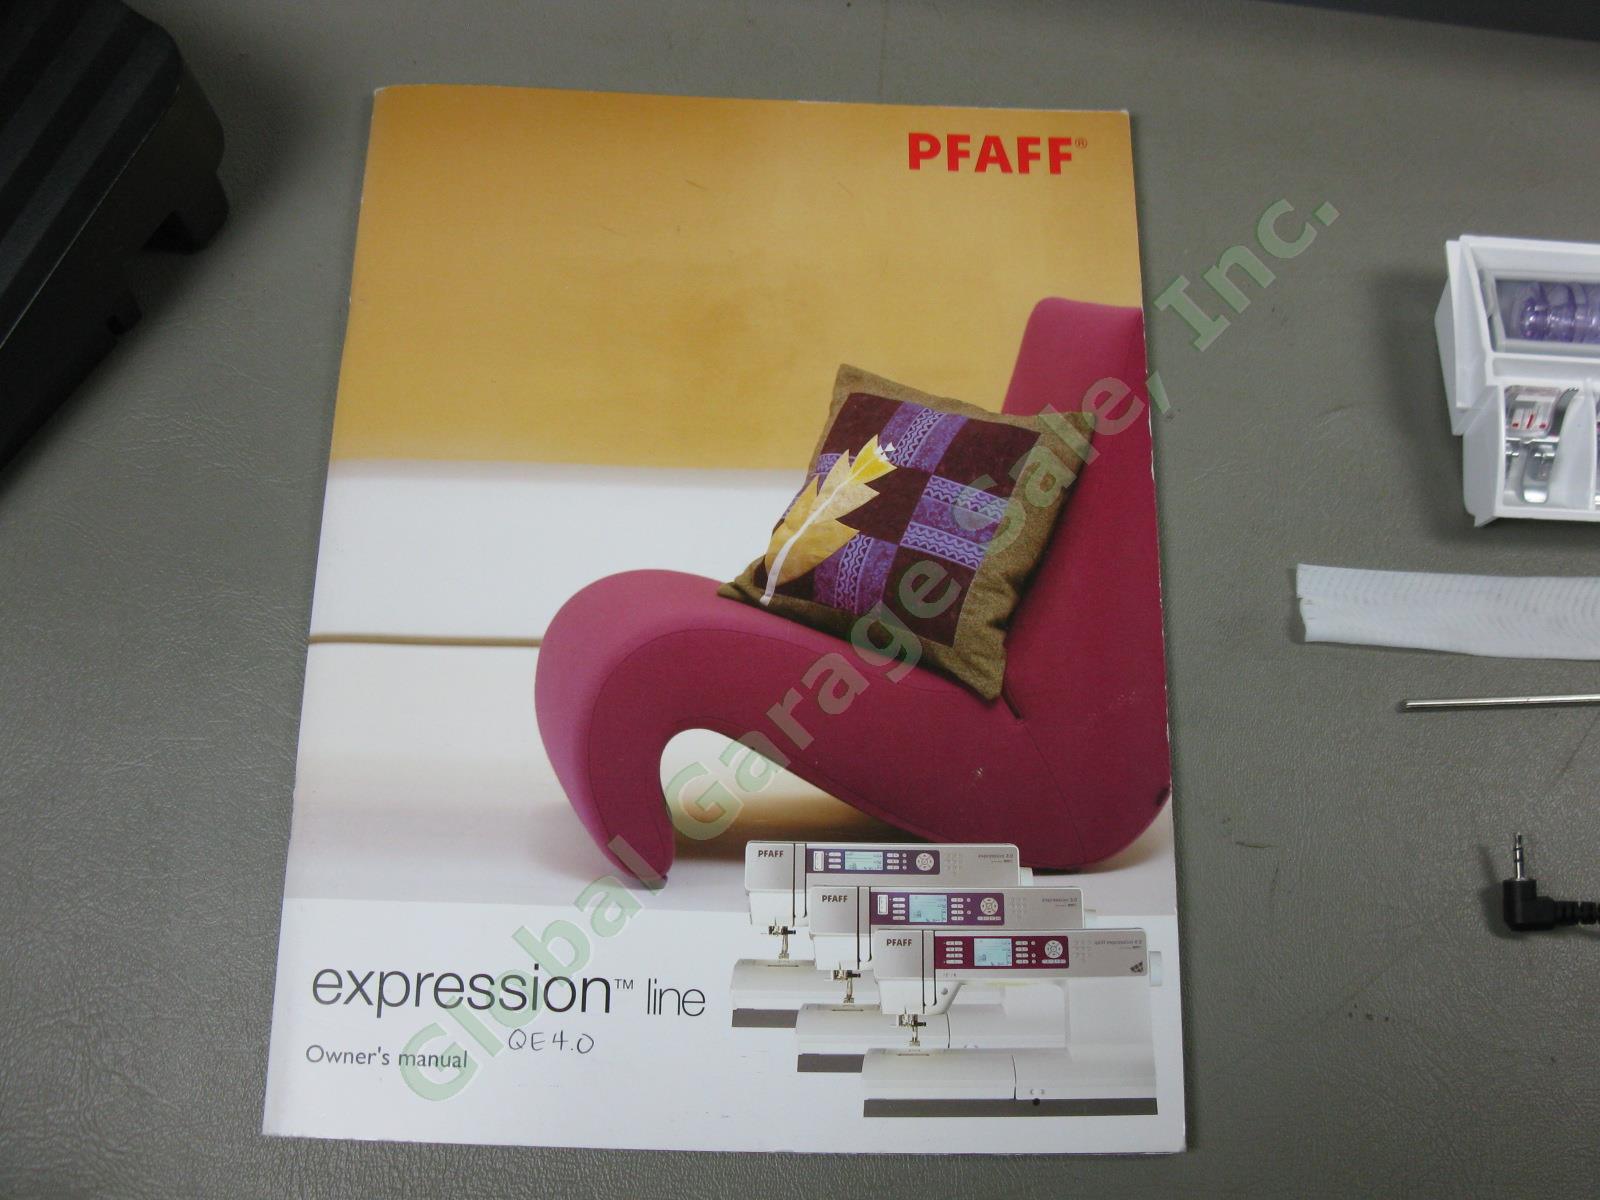 Pfaff Quilt Expression 4.0 Sewing Machine One Owner! Just Serviced! No Reserve! 13